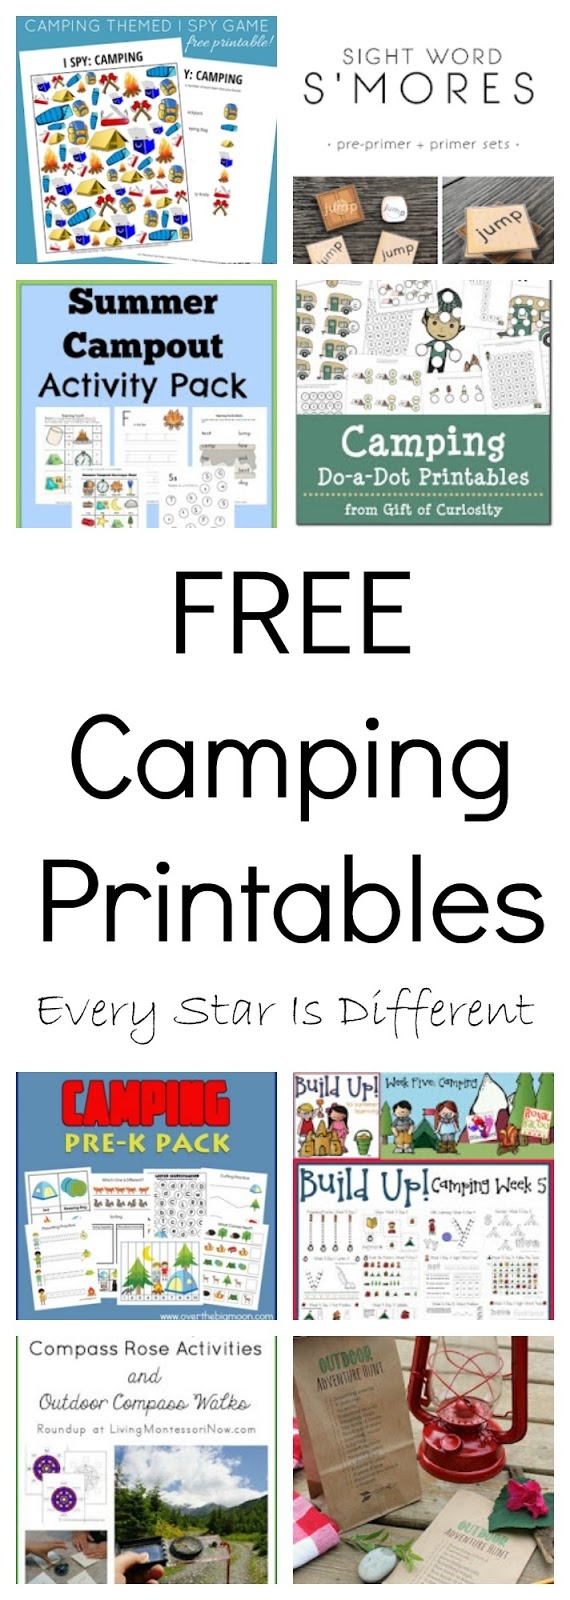 Free Camping Printables - Every Star Is Different - Free Camping Printables